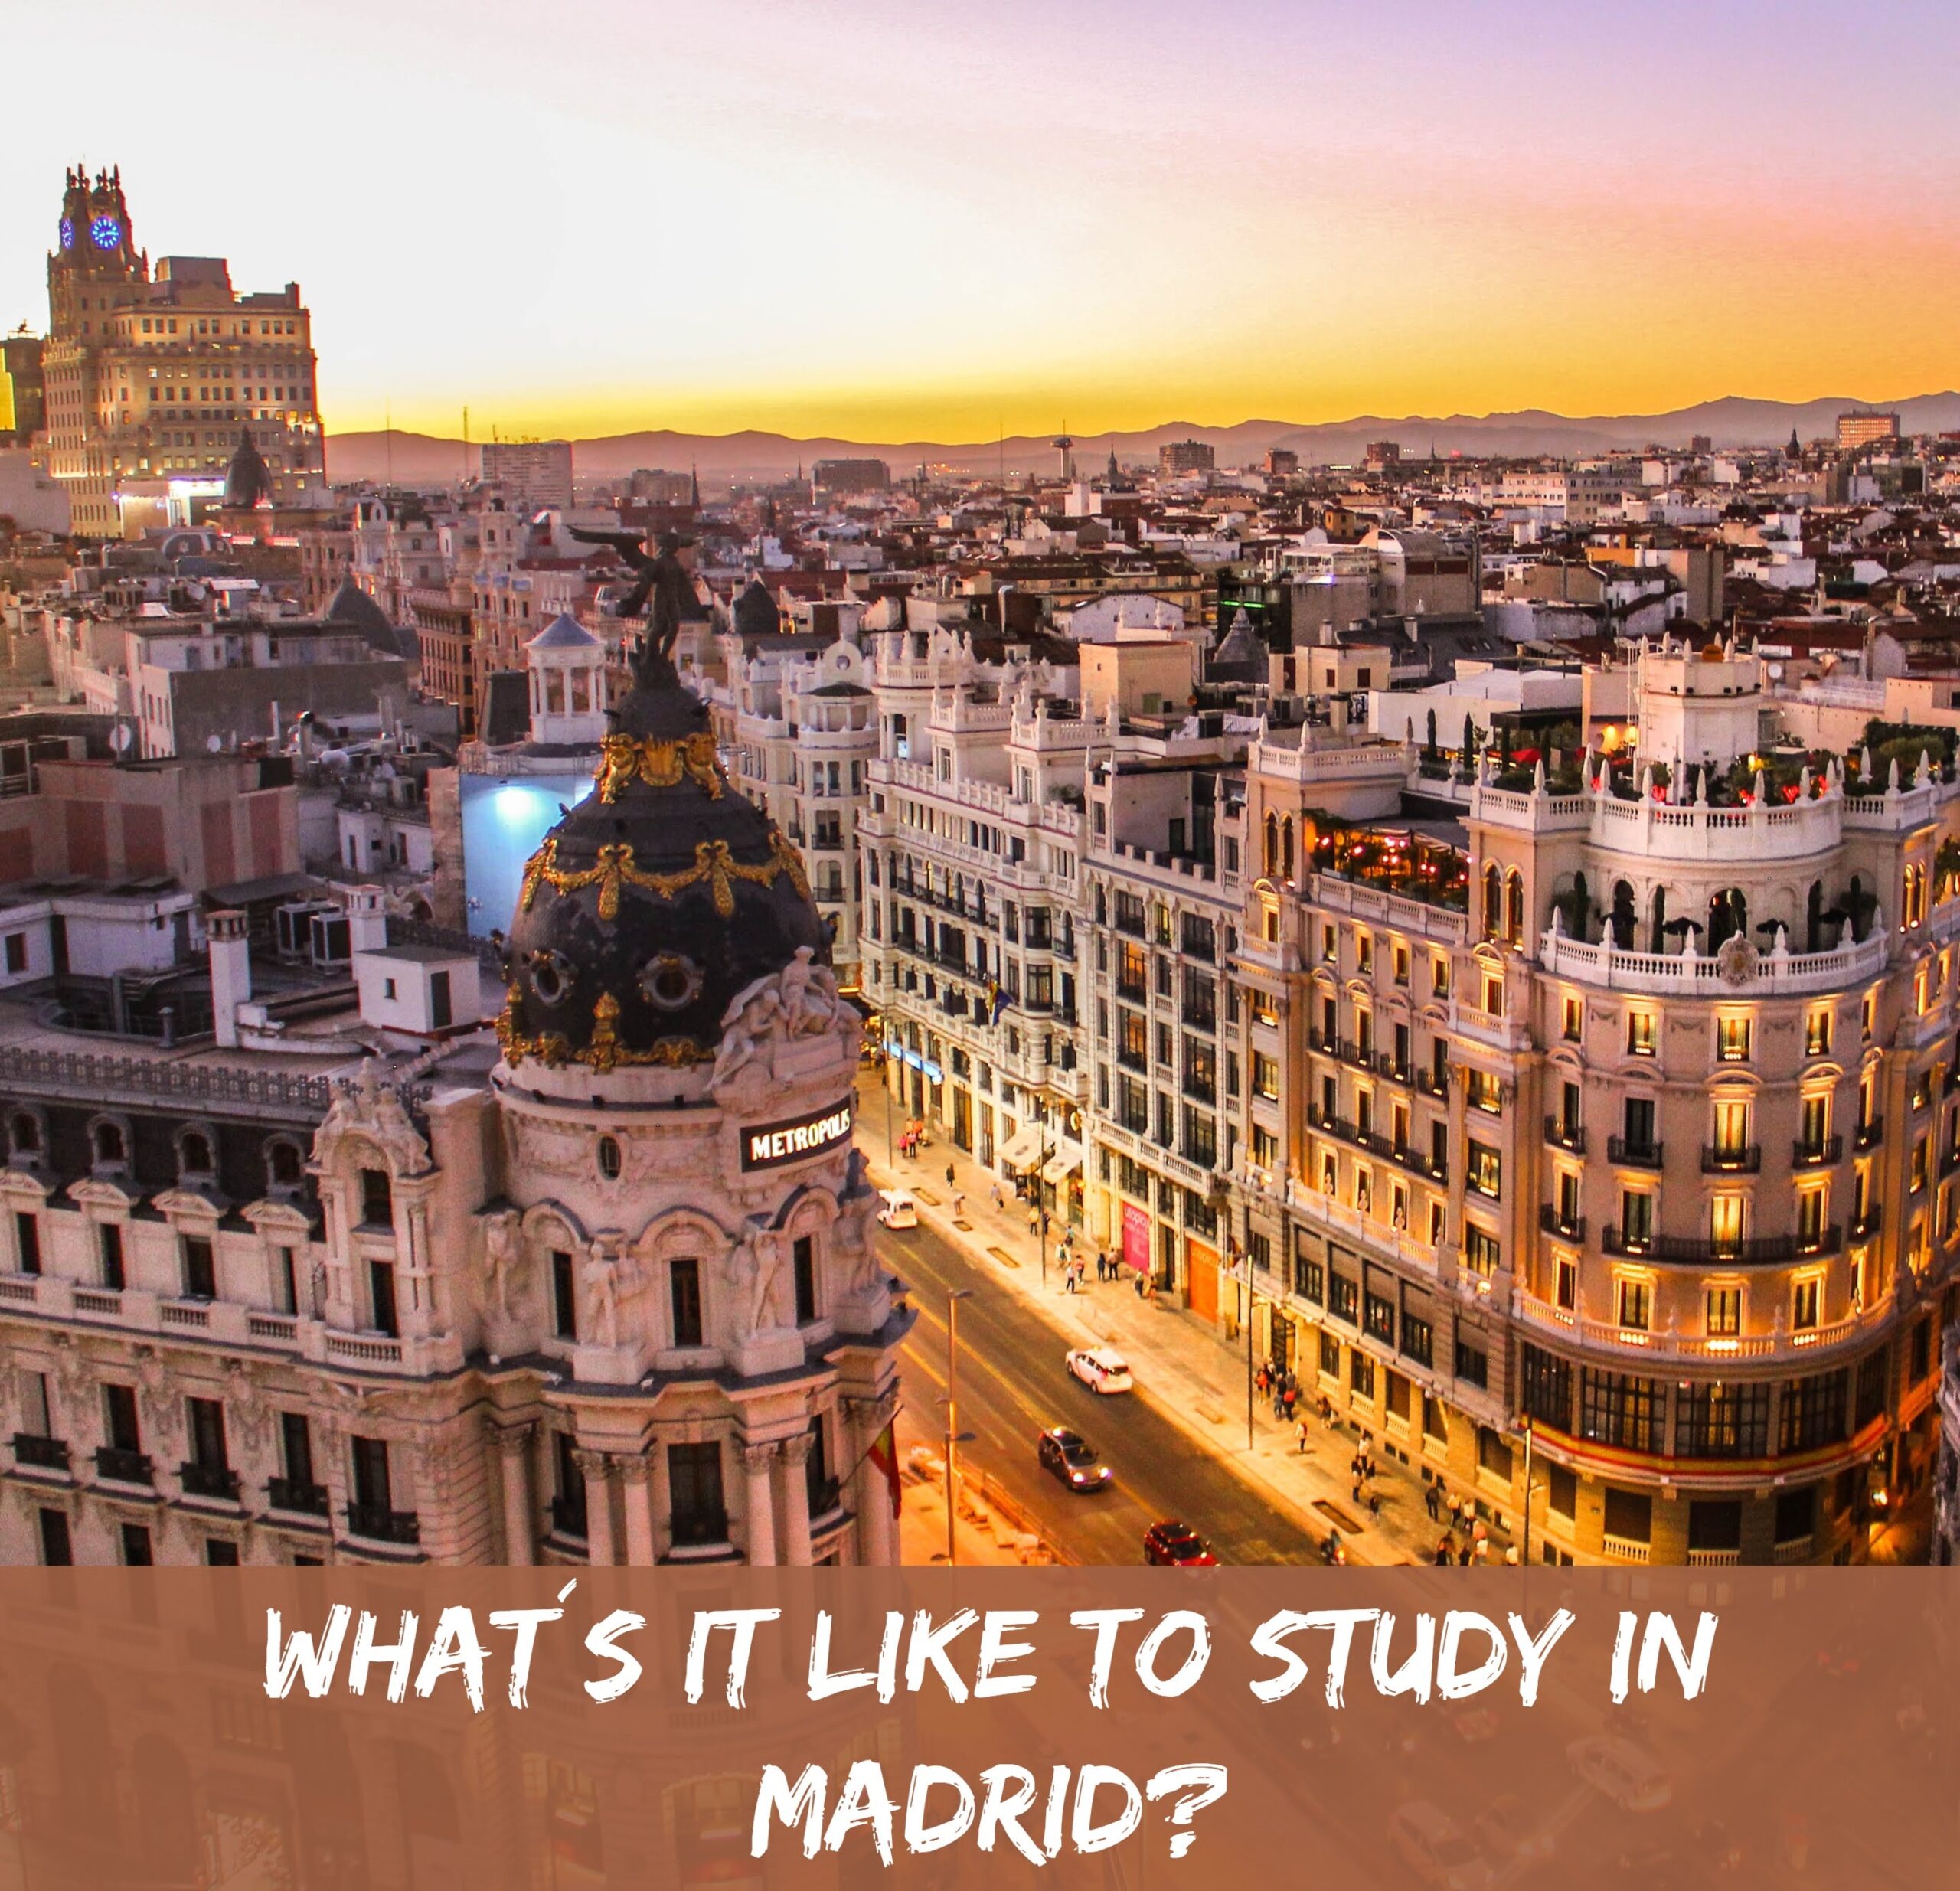 What is it like to study in Madrid